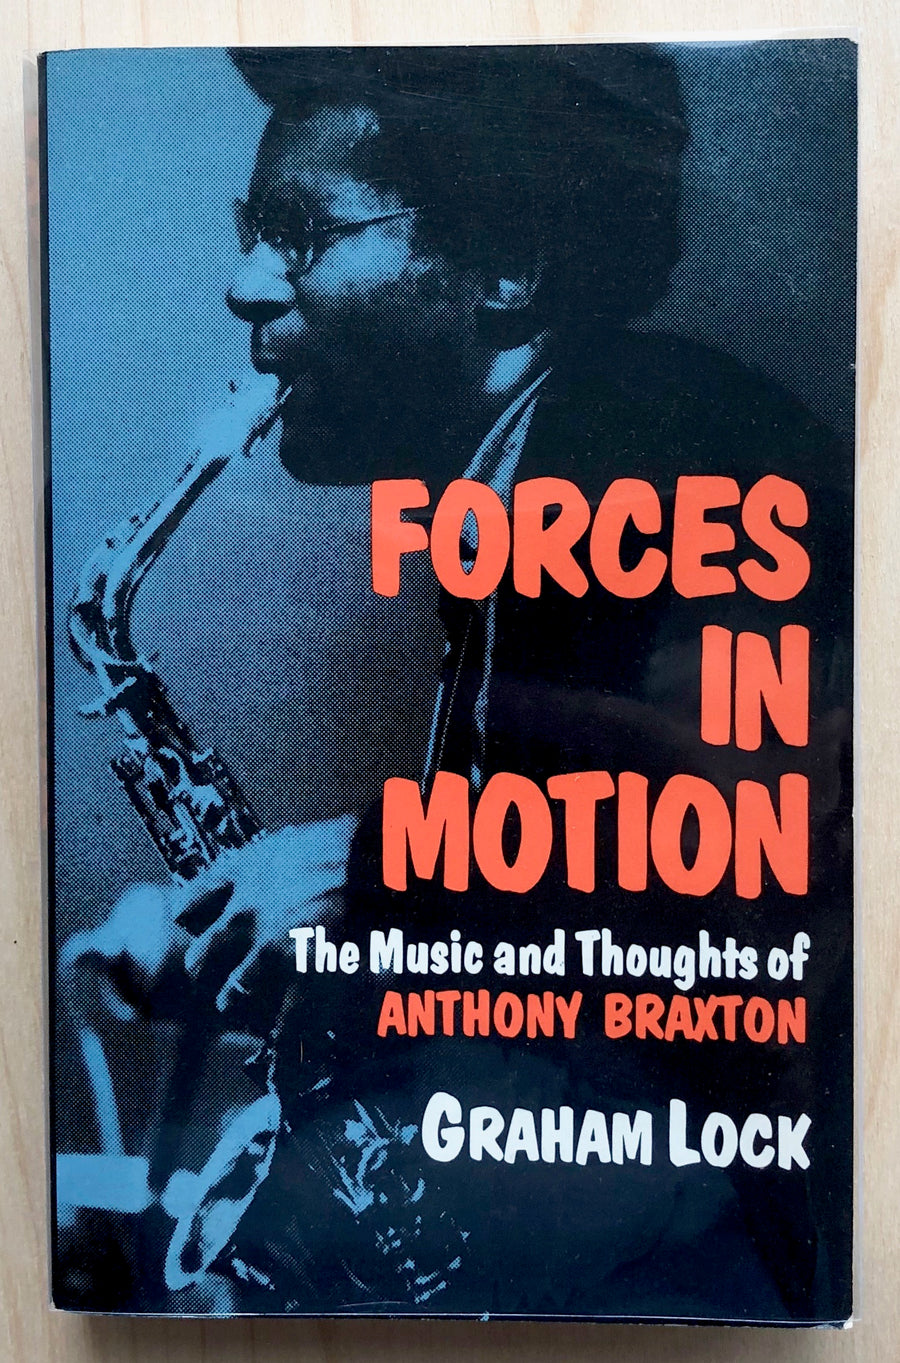 FORCES IN MOTION: THE MUSIC AND THOUGHTS OF ANTHONY BRAXTON by Graham Lock